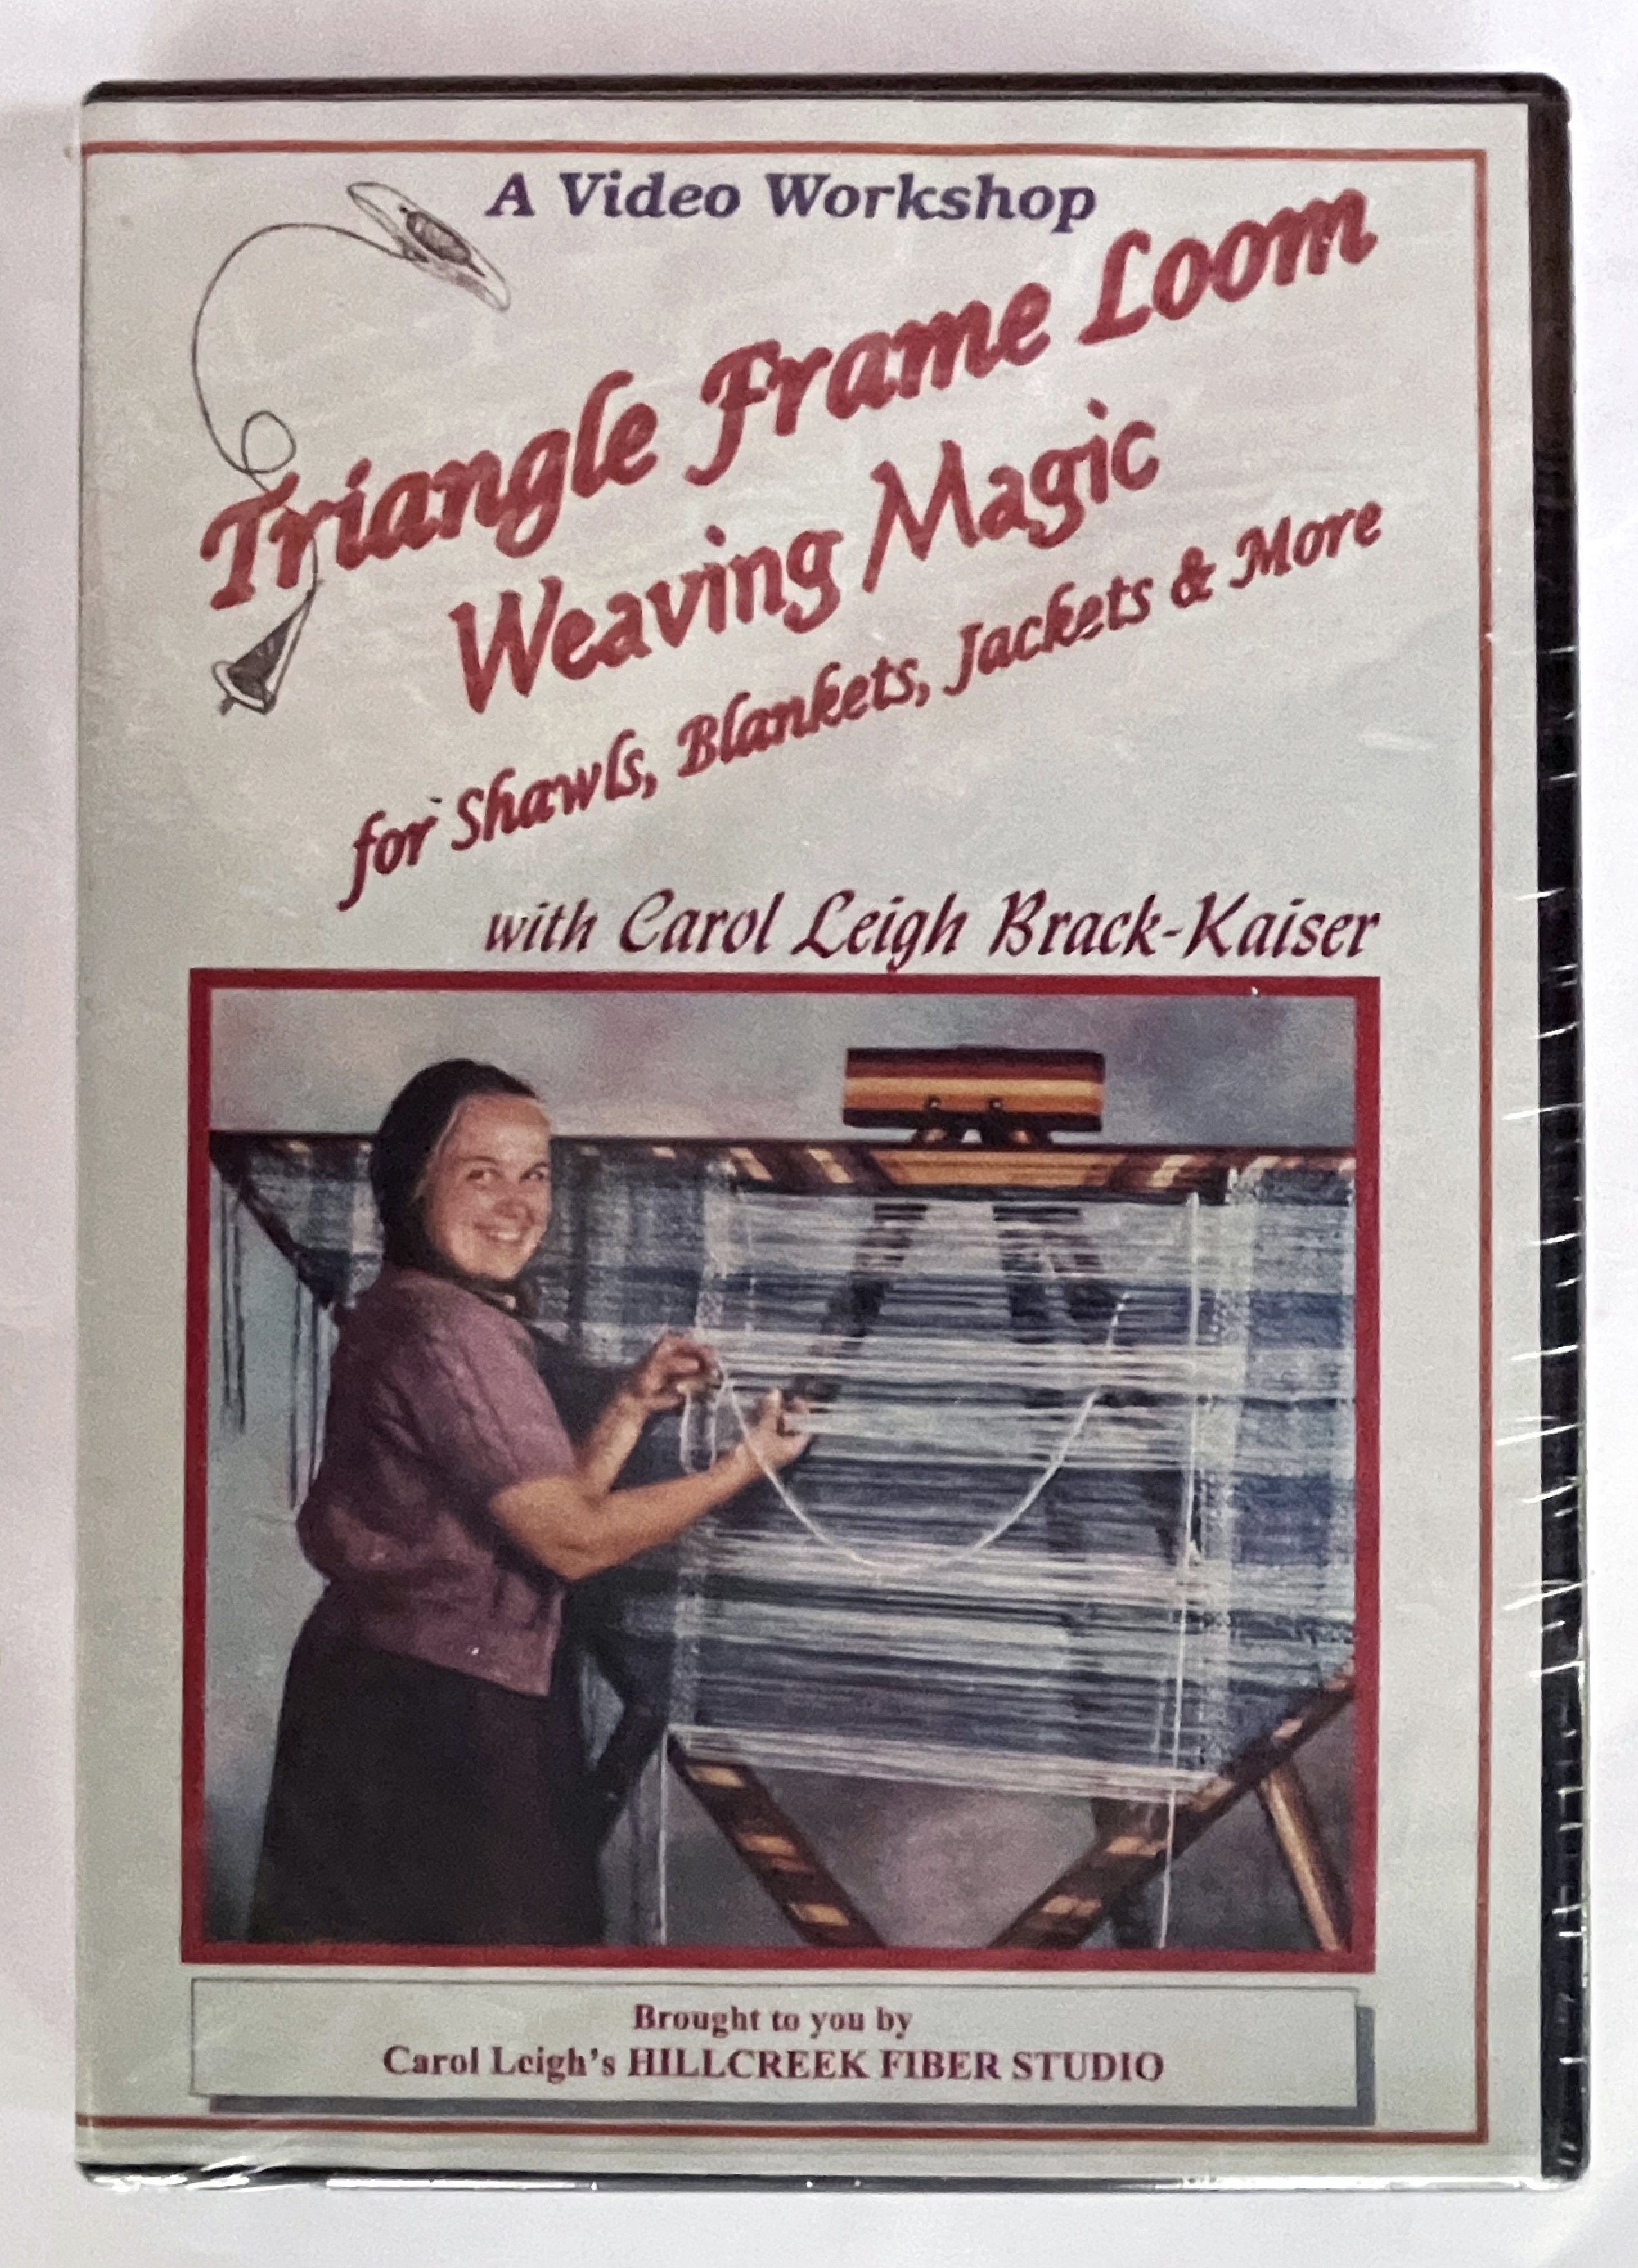 Triangle Frame Loom Weaving Magic for Shawls, Blankets, Jackets & More